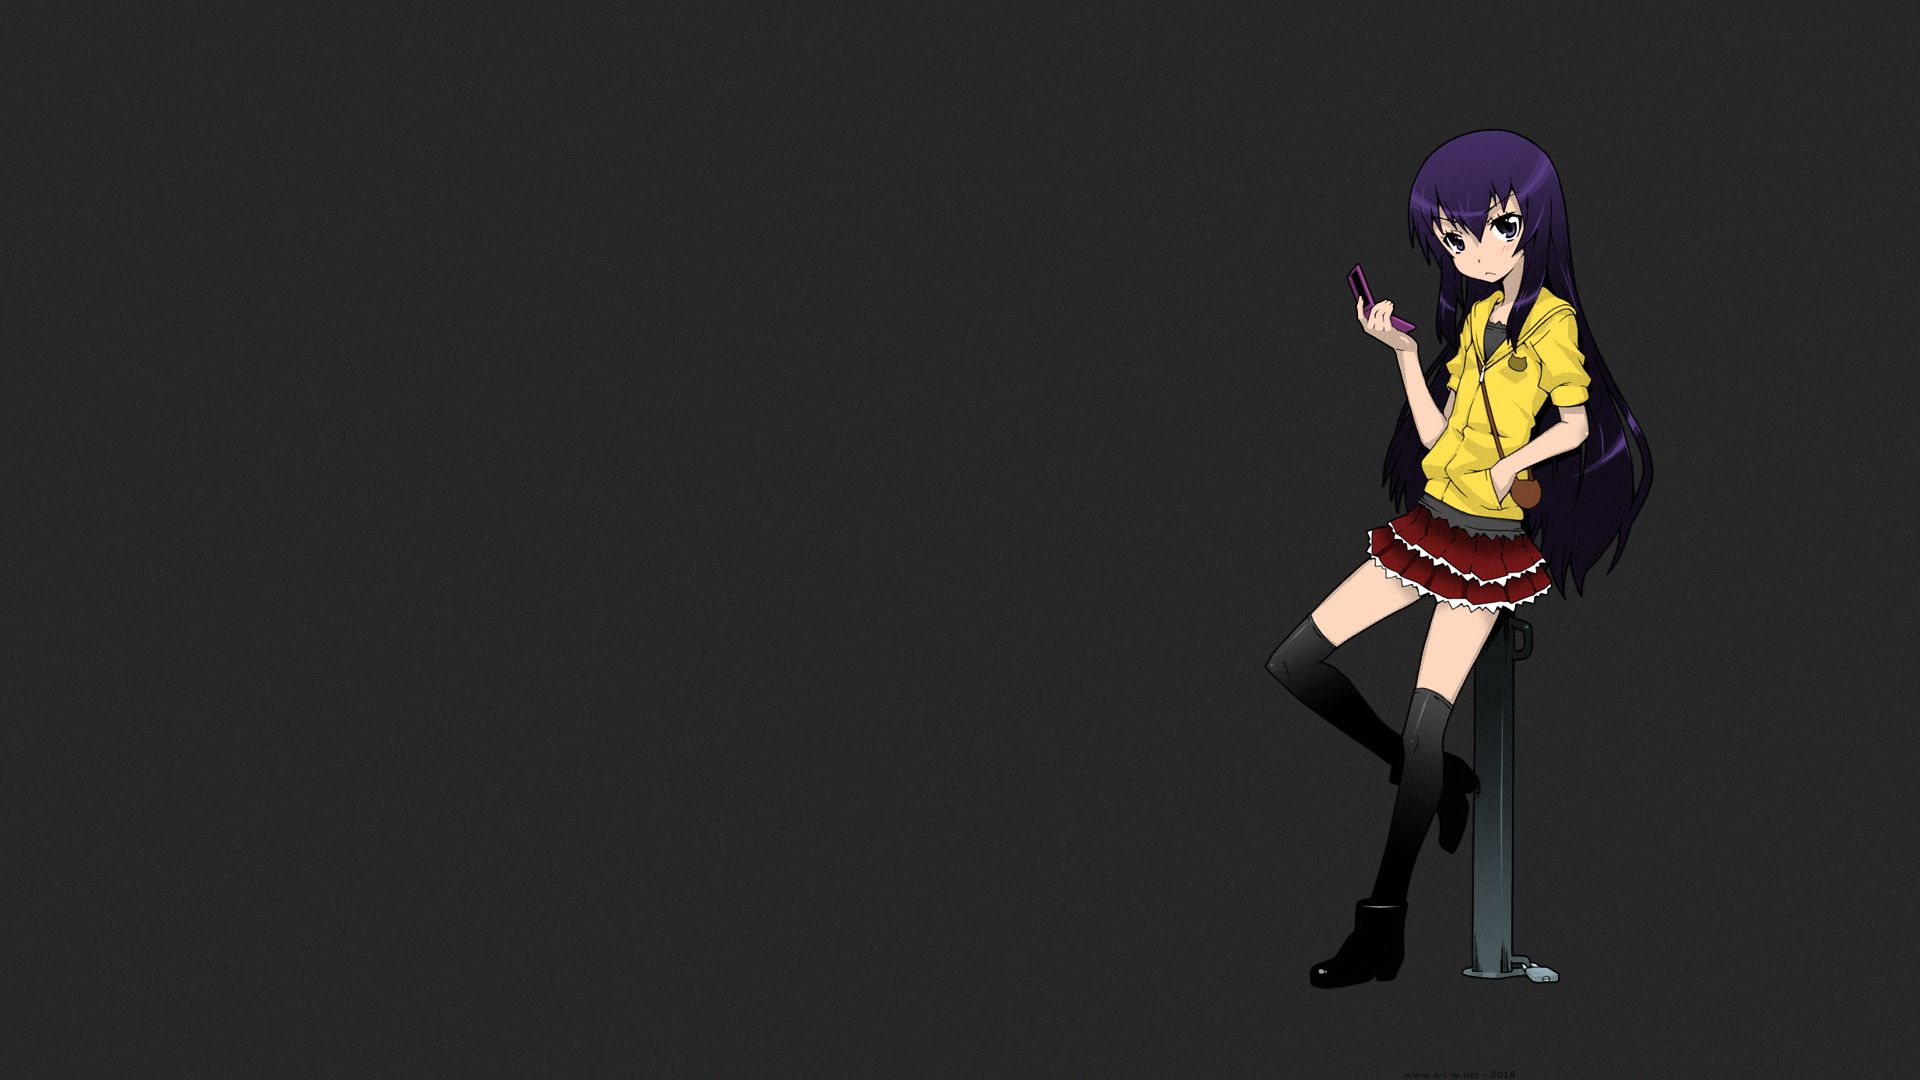 544272 1920x1080 music orchestra anime girls wallpaper JPG 516 kB - Rare  Gallery HD Wallpapers